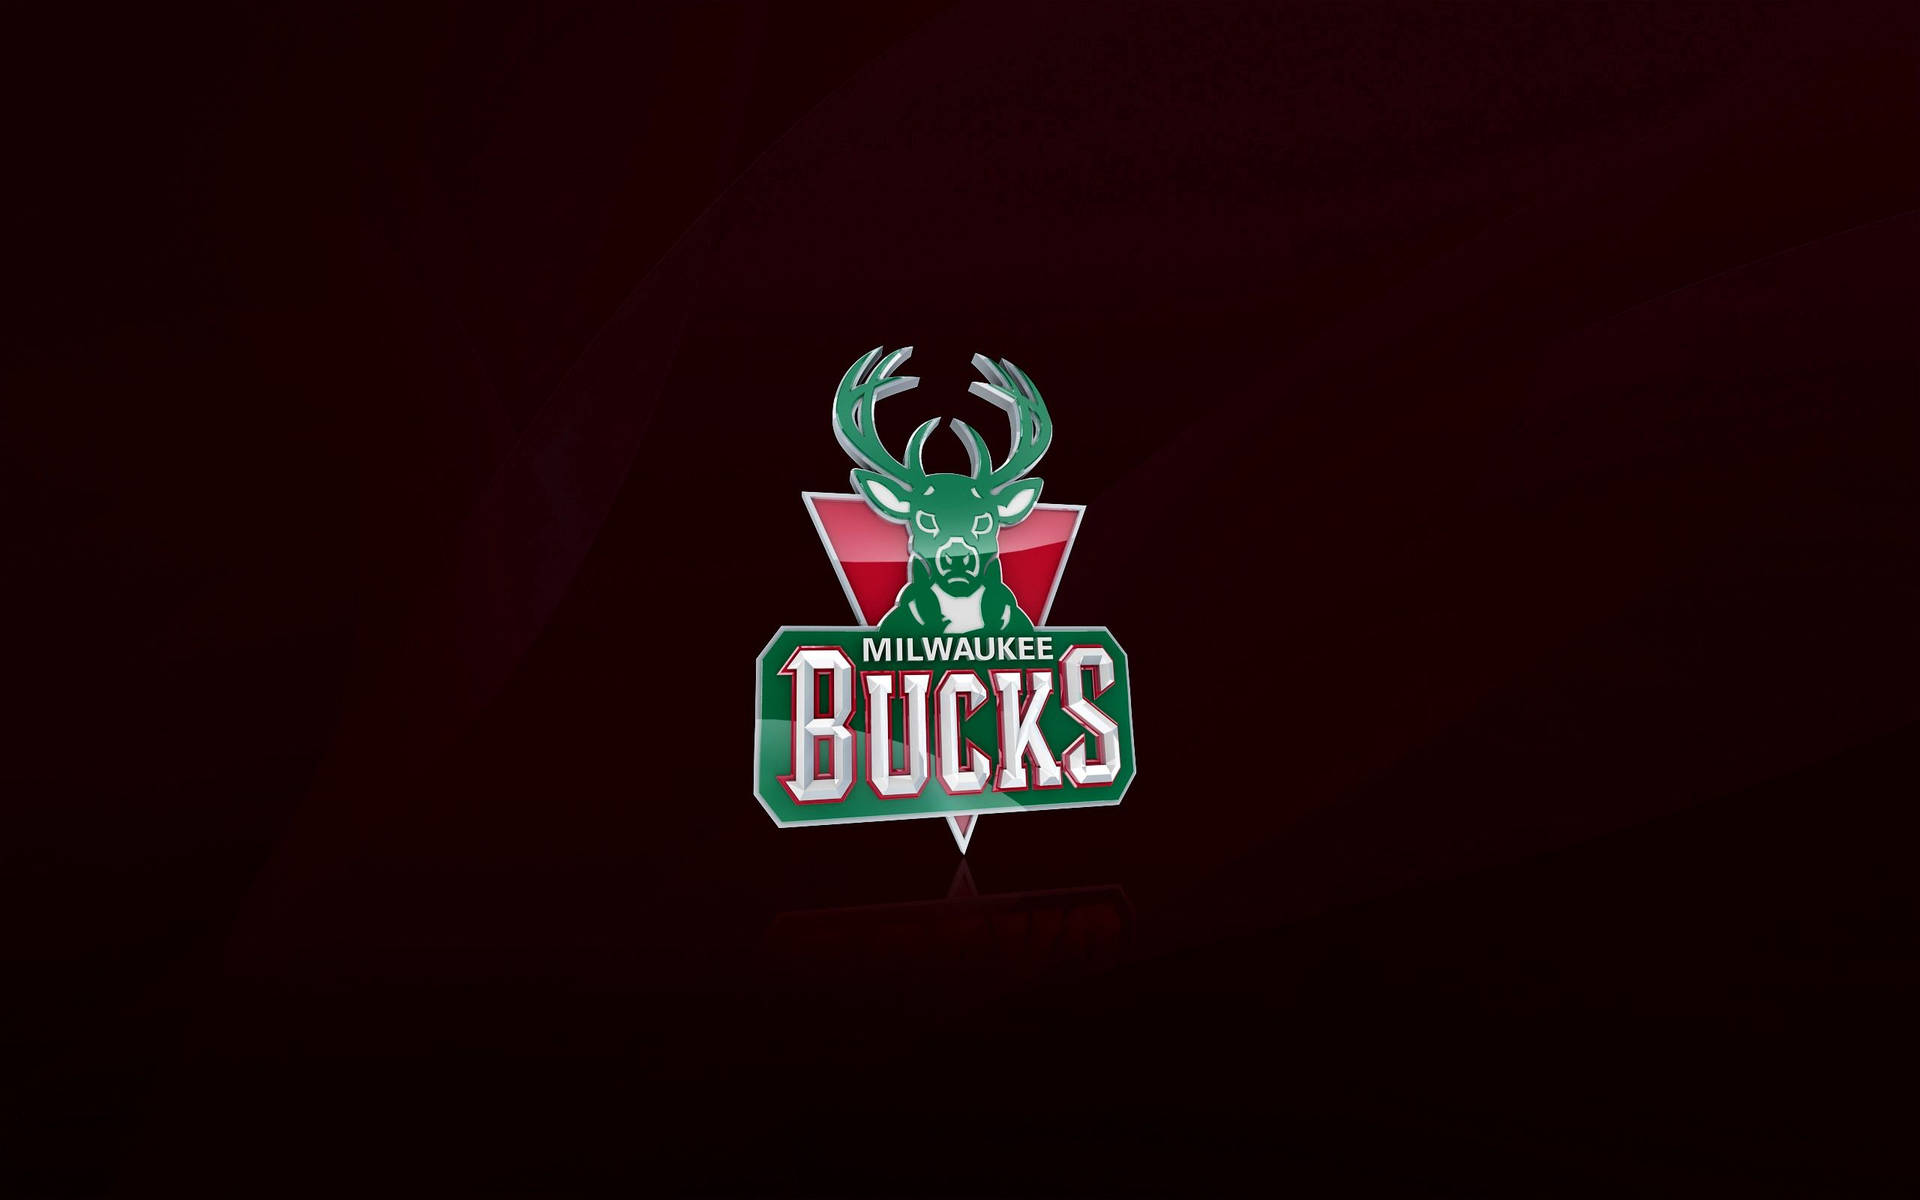 The Milwaukee Bucks, proudly representing the Central Division of the NBA Wallpaper